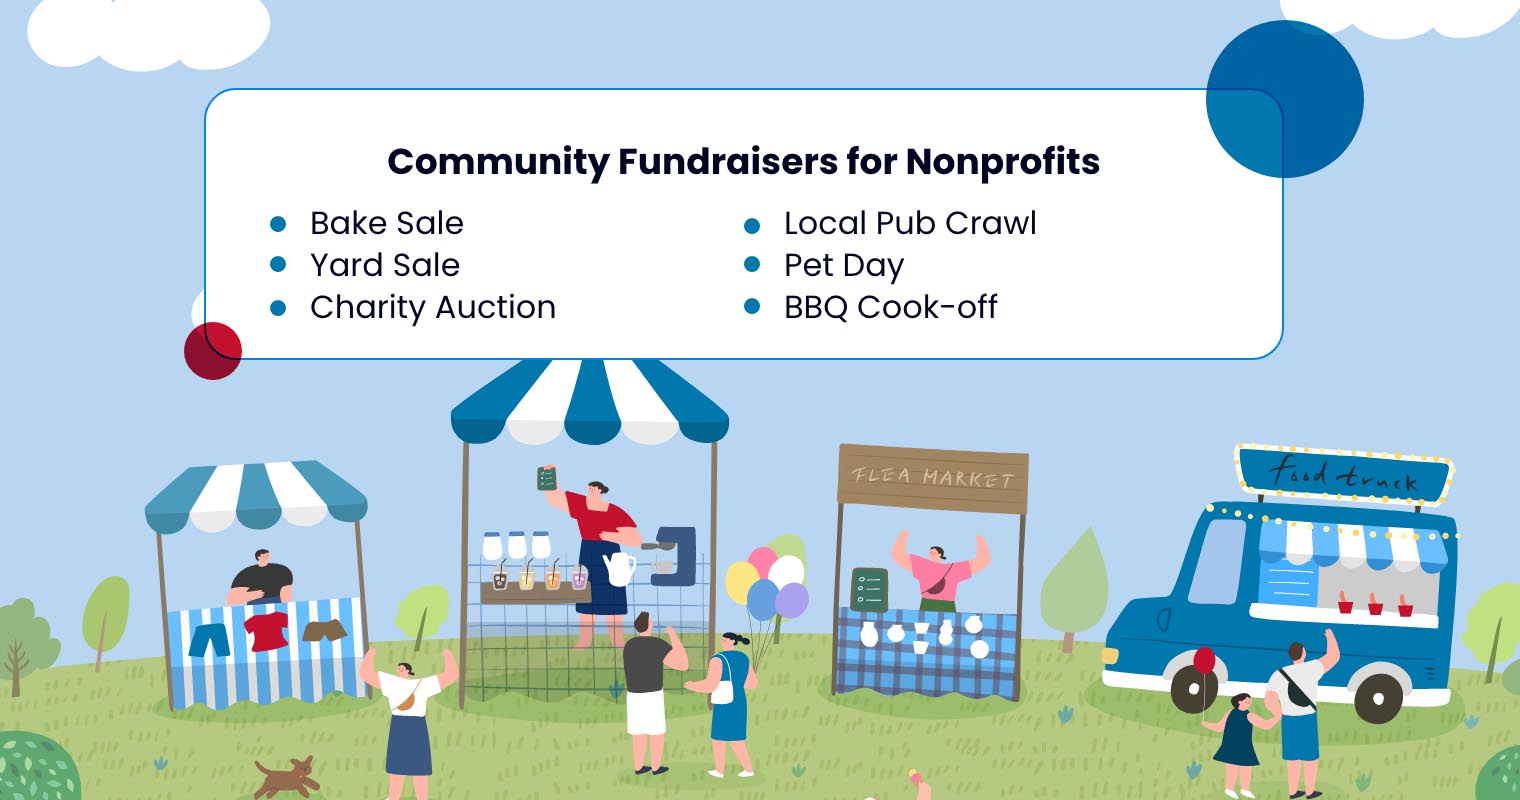 Community Fundraisers for Nonprofits